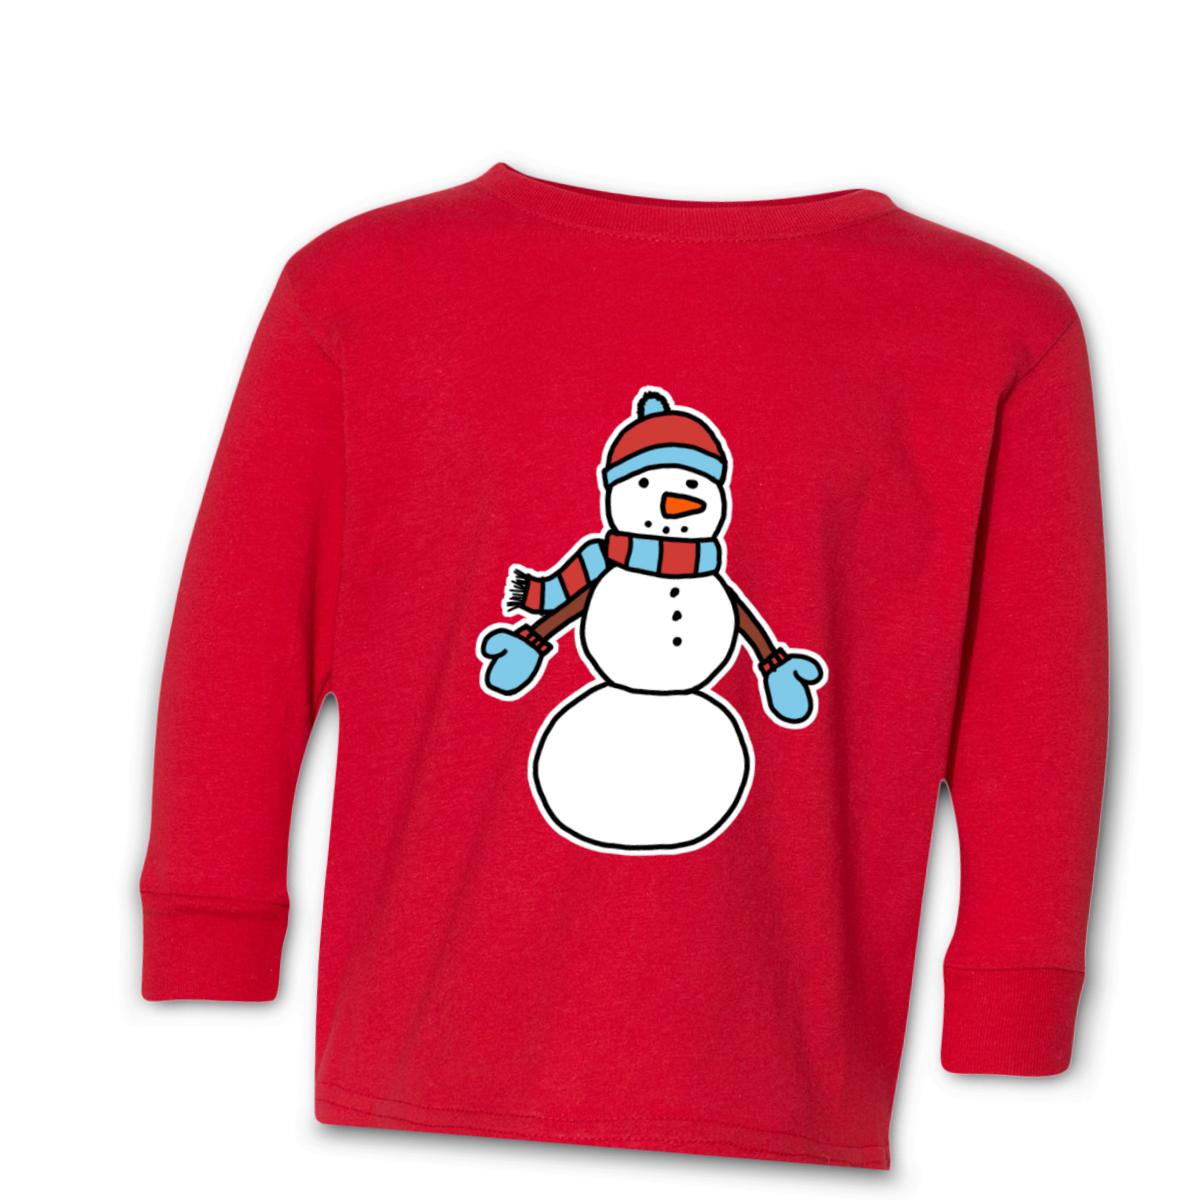 Snowman Bundled Up Toddler Long Sleeve Tee 56T red